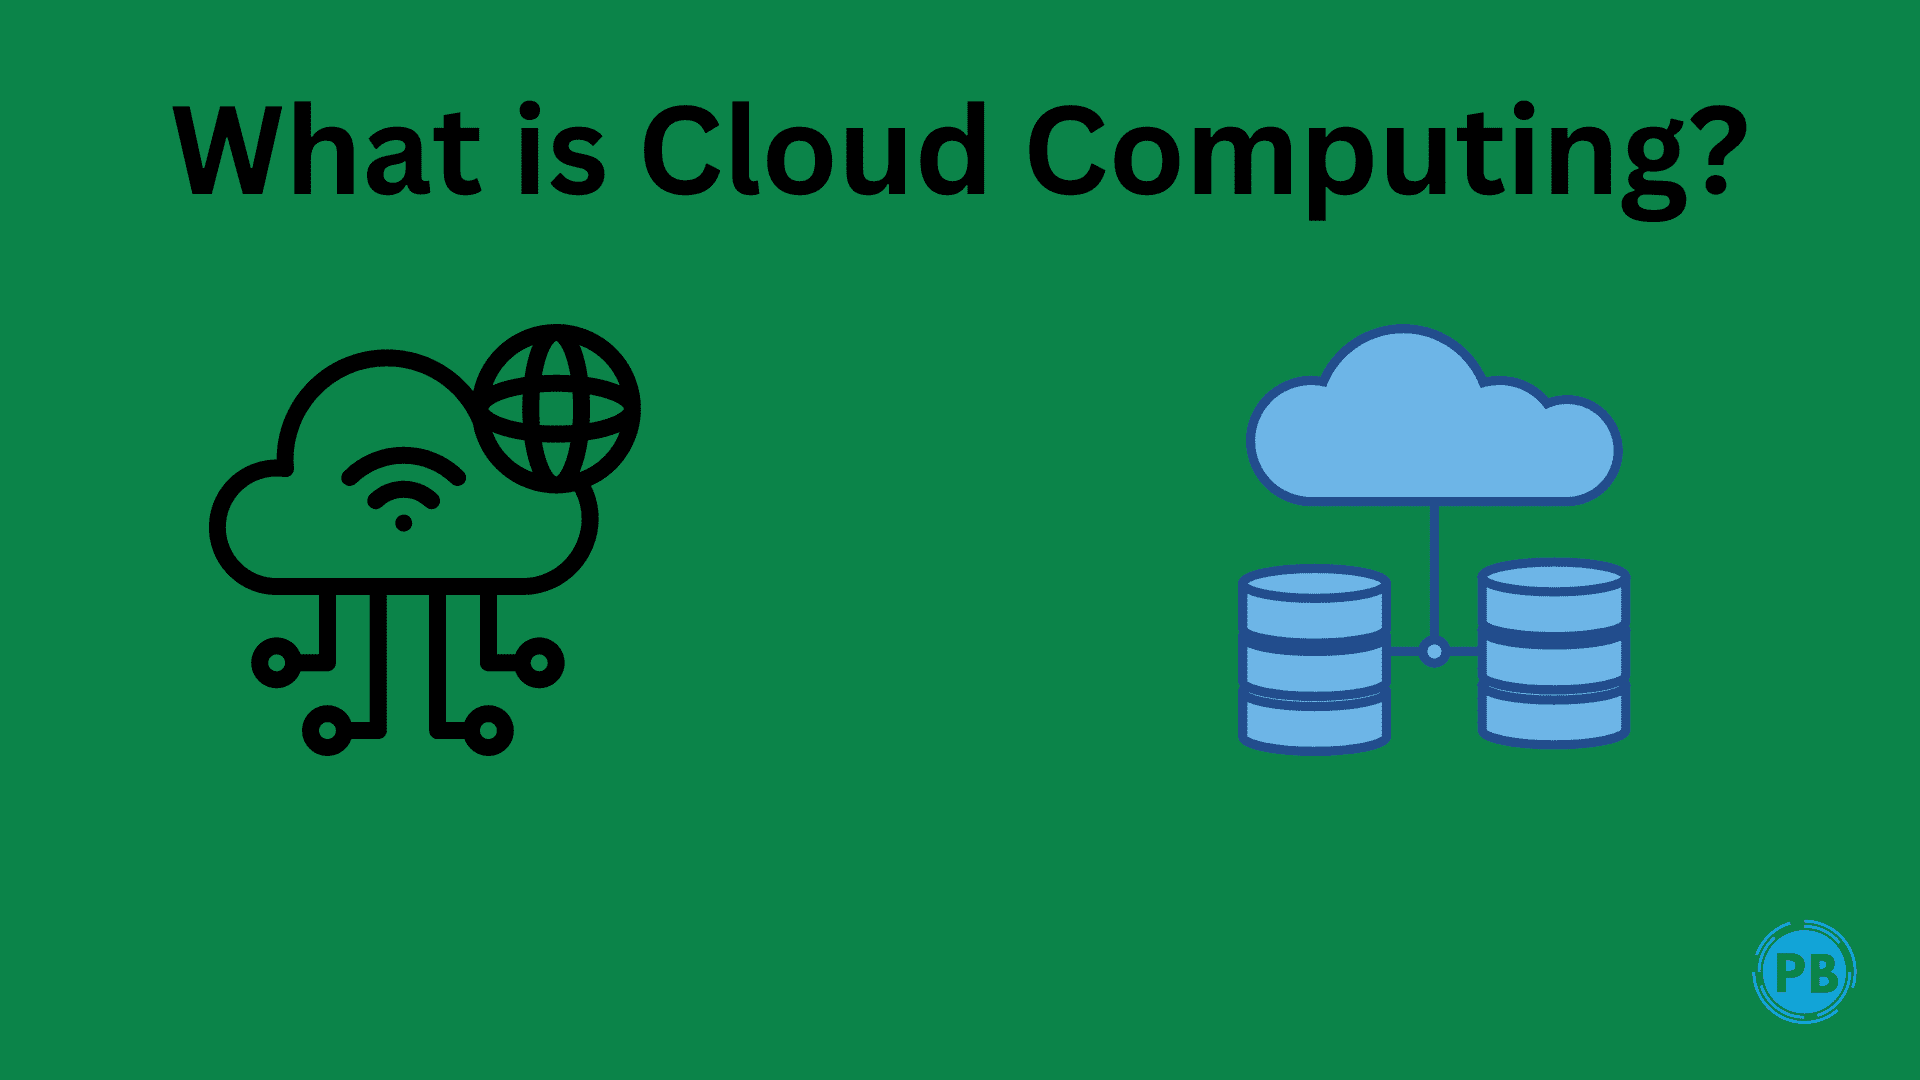 what is Cloud Computing? details